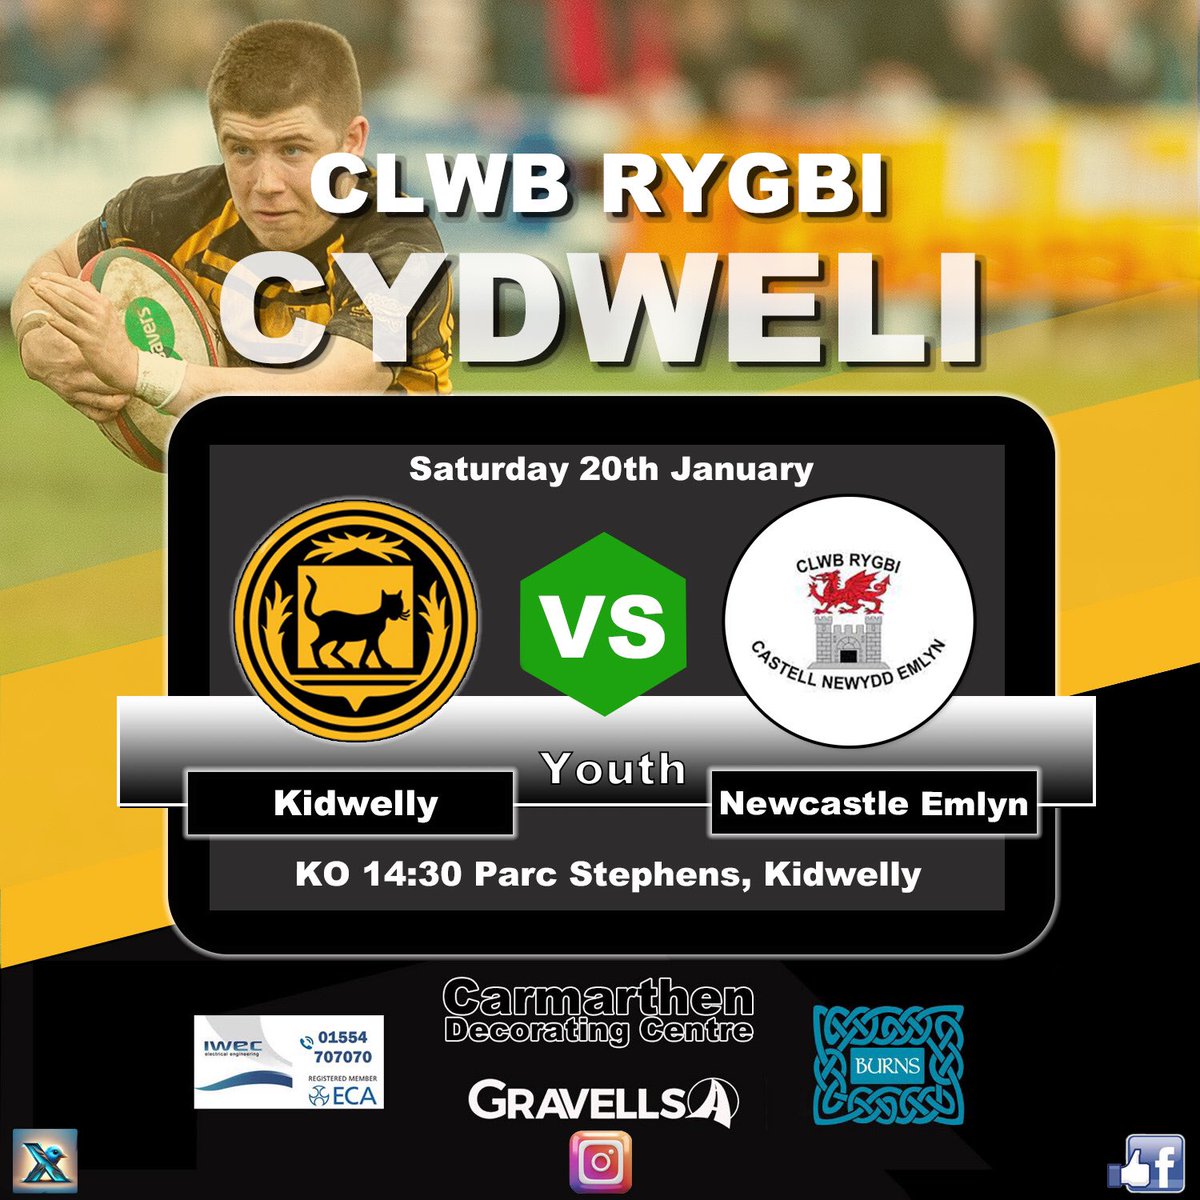 On the road this weekend against Gowerton @gowertonrfc down to earth after last weeks game,Gowerton away will be a big ask for us without doubt, our youth @kidwellyrfcu16 entertain Newcastle Emlyn @ClwbRygbiCNE at Parc Stephens, all support is truly appreciated,good luck everyone